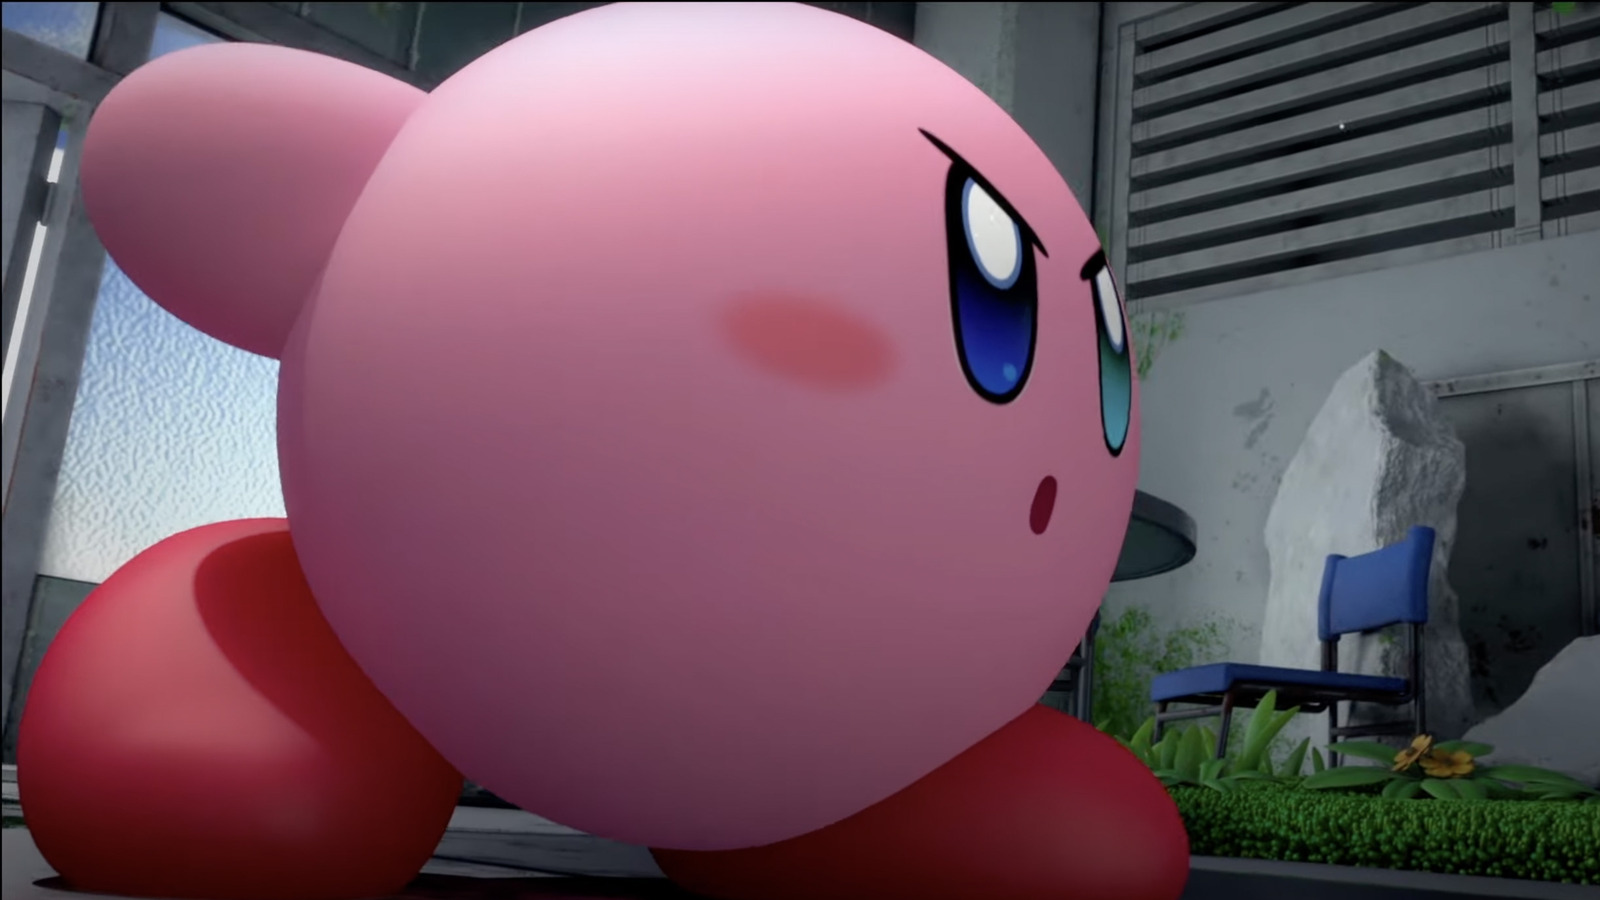 Kirby and the Forgotten Land has already smashed series records